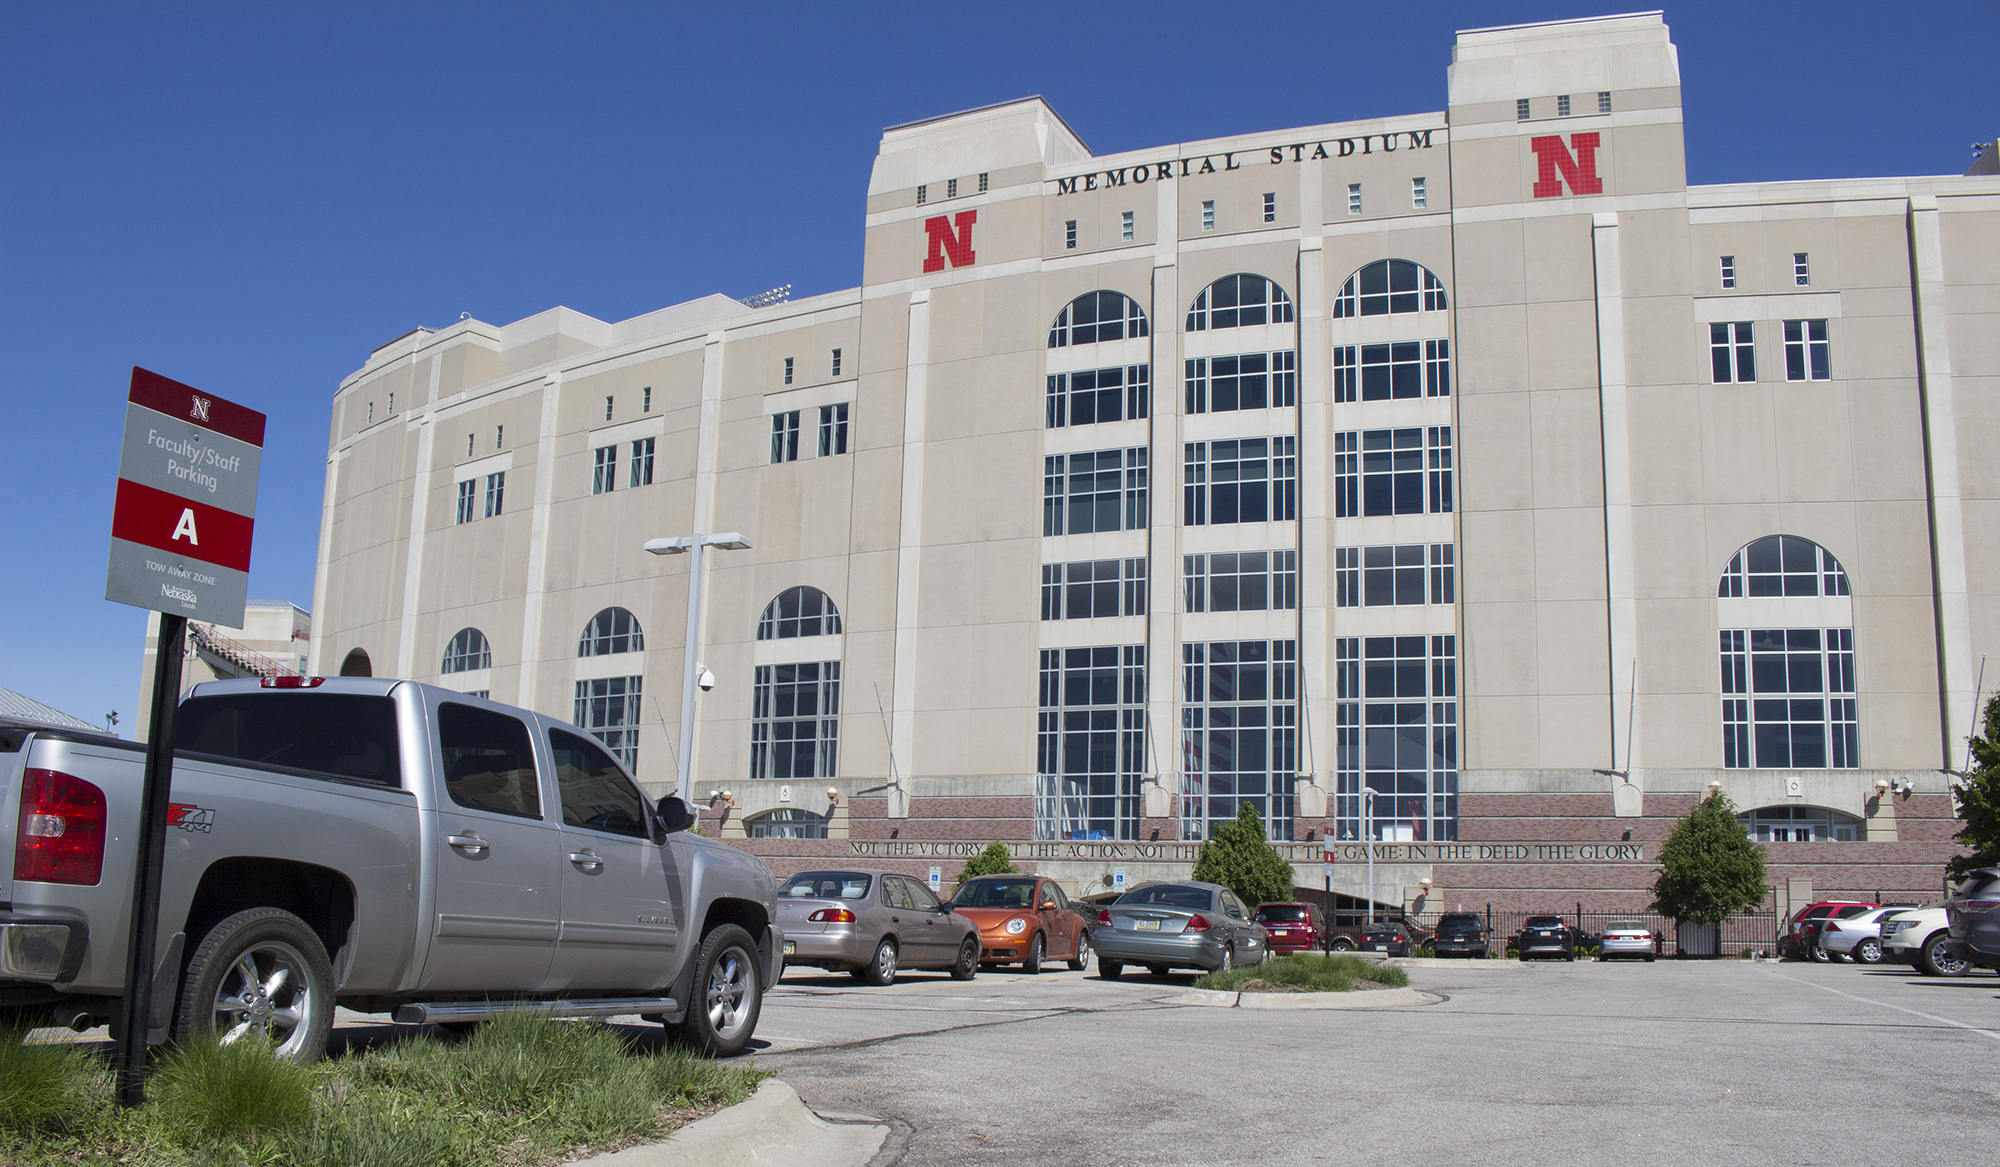 Image of vehicle parked in a designated parking lot by the Memorial Stadium